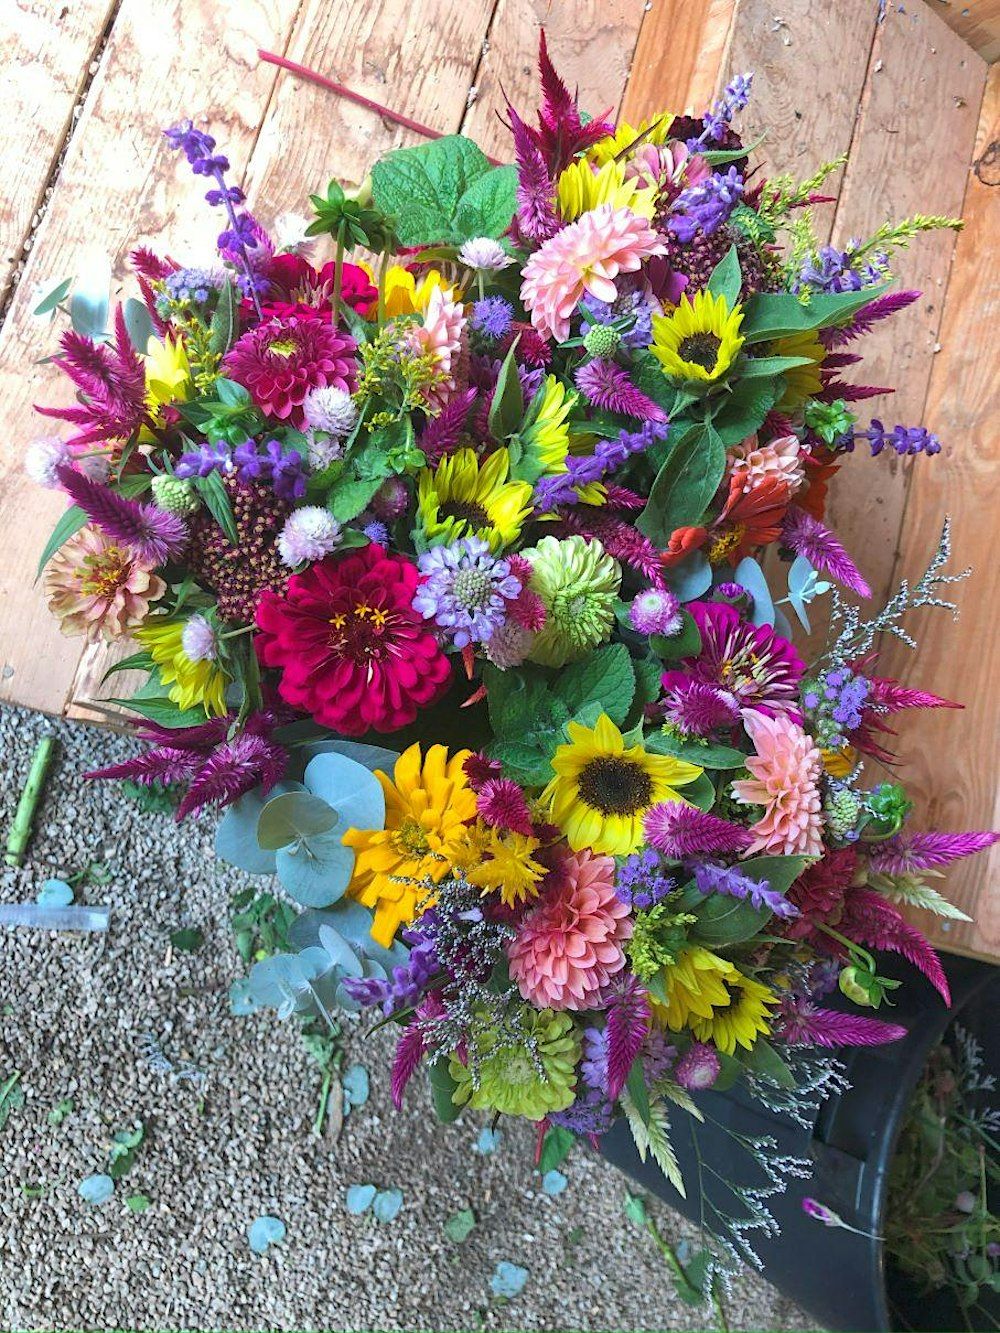 Bubbles and Bouquets - Flowers, Champagne and Fun - Learn to Make a Flower Bouquet!